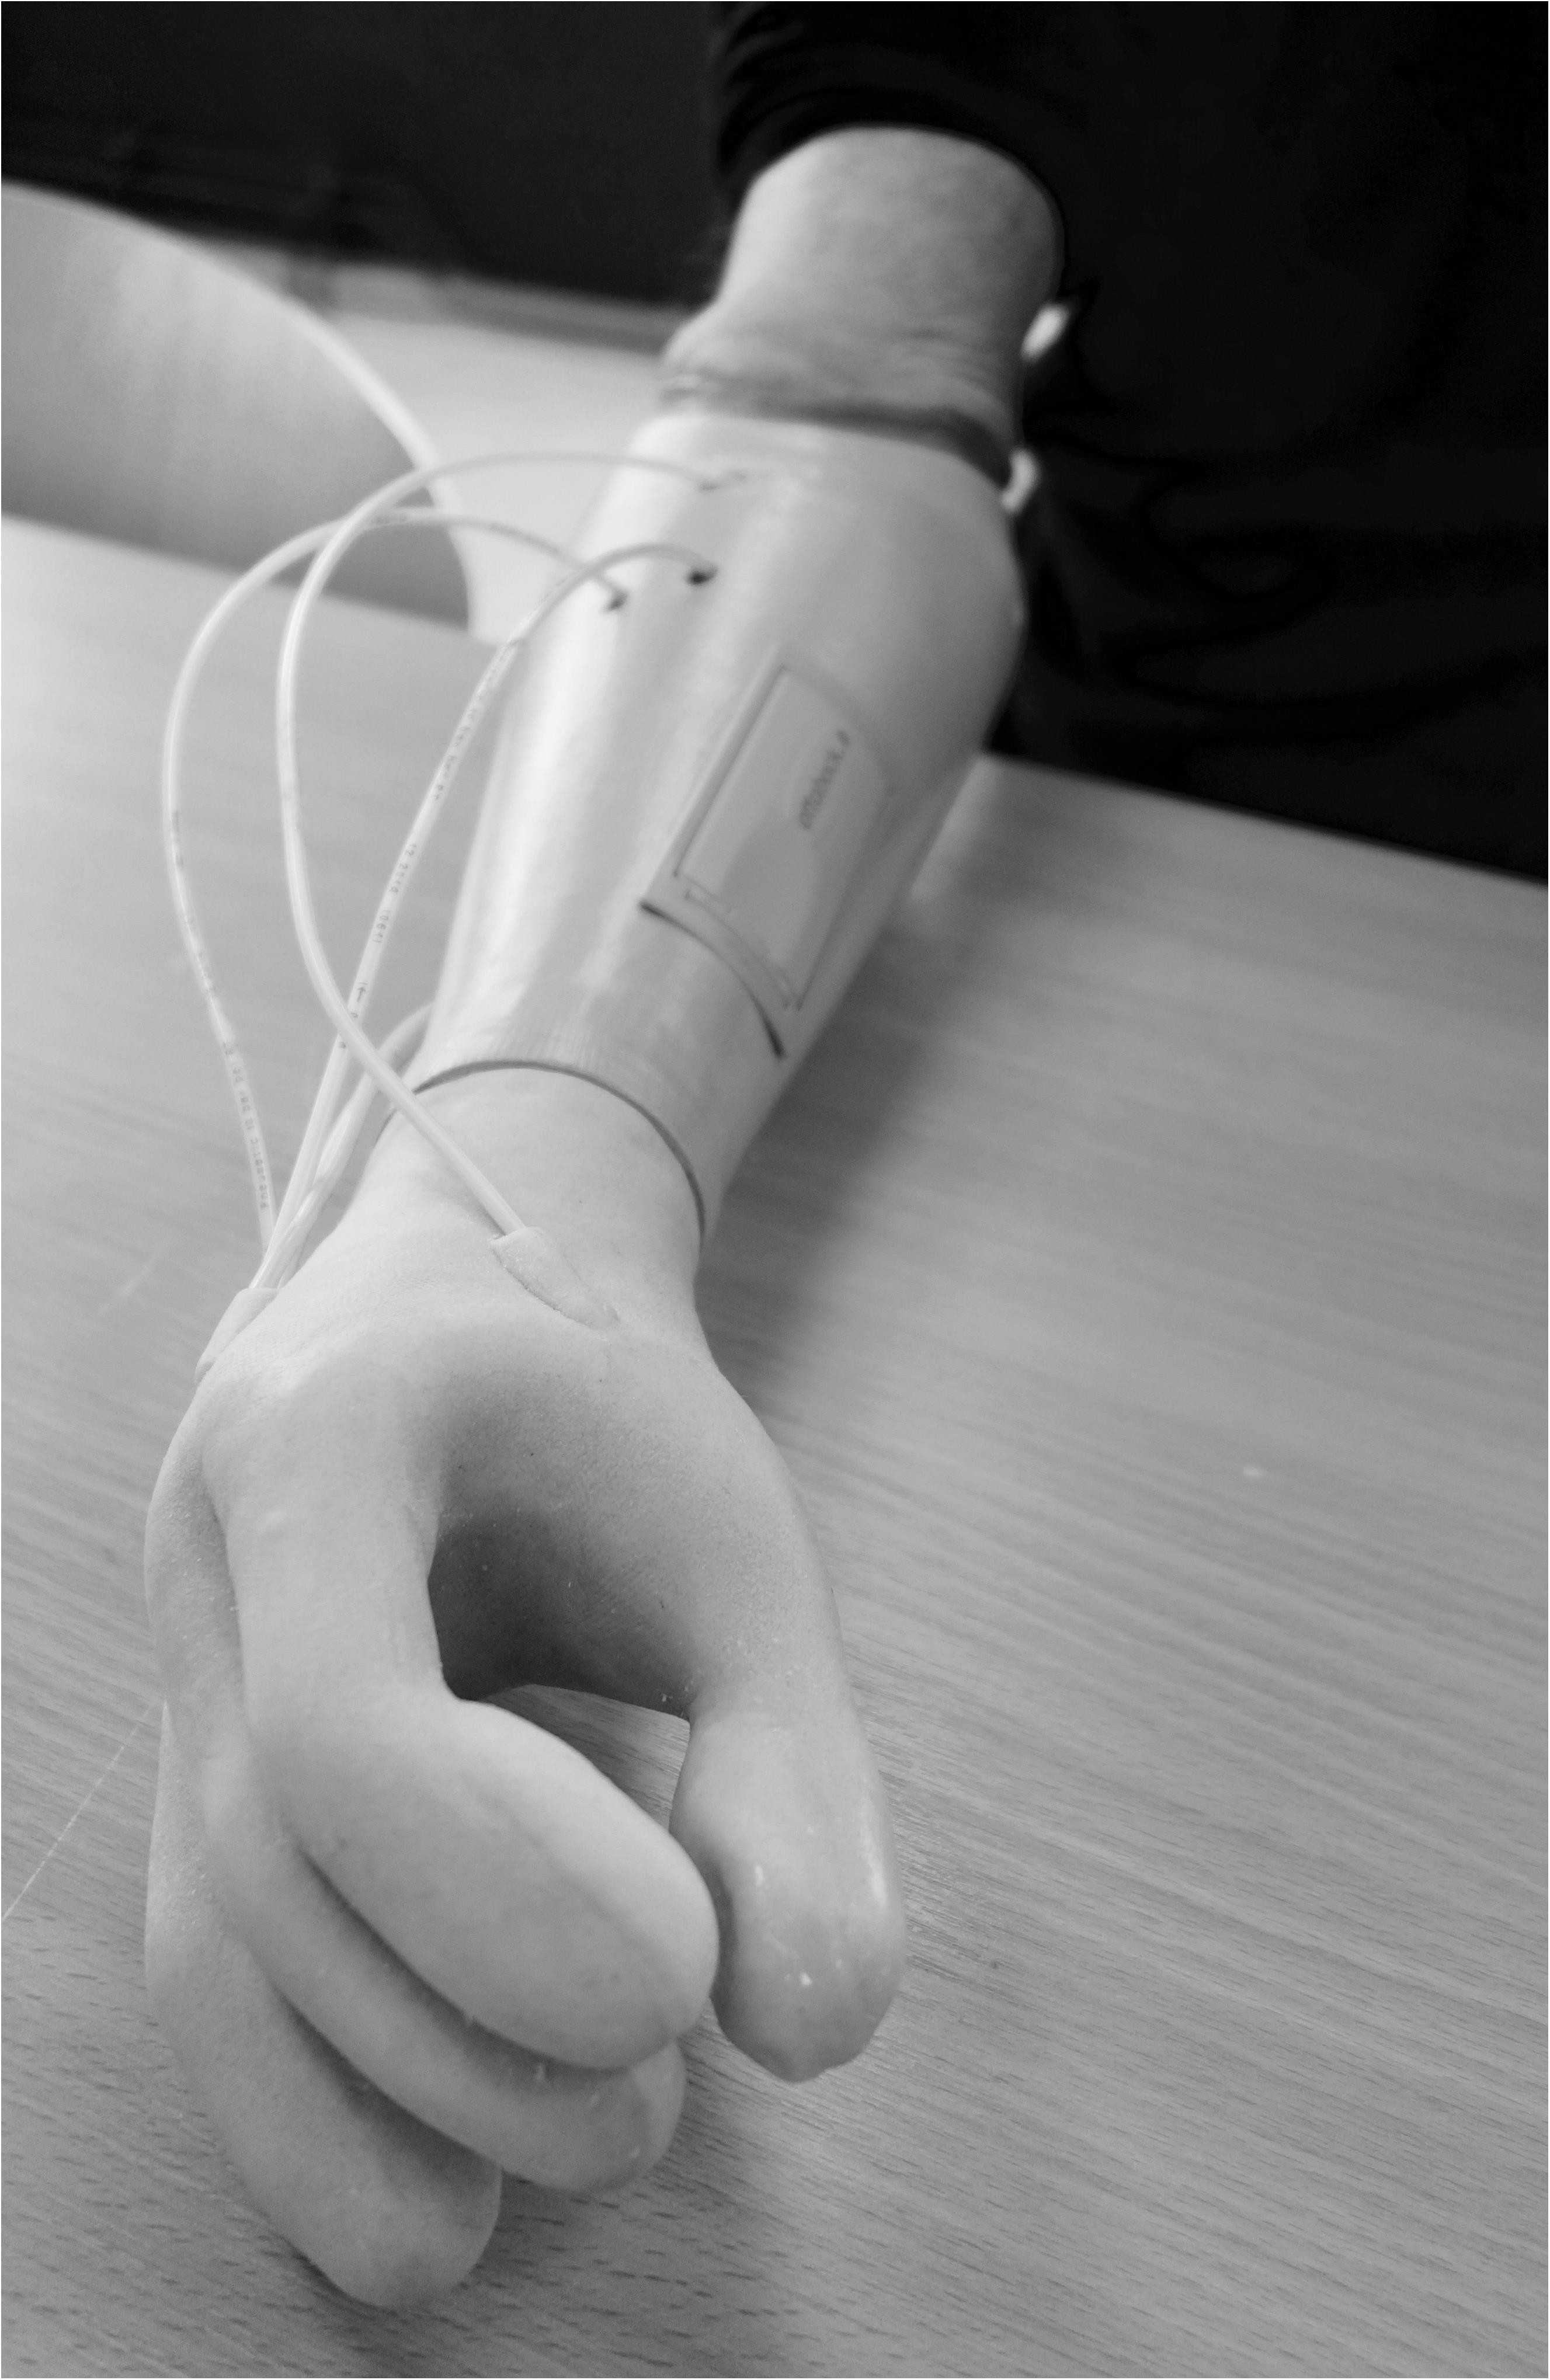 Prosthetic Products, Best Artificial Arm